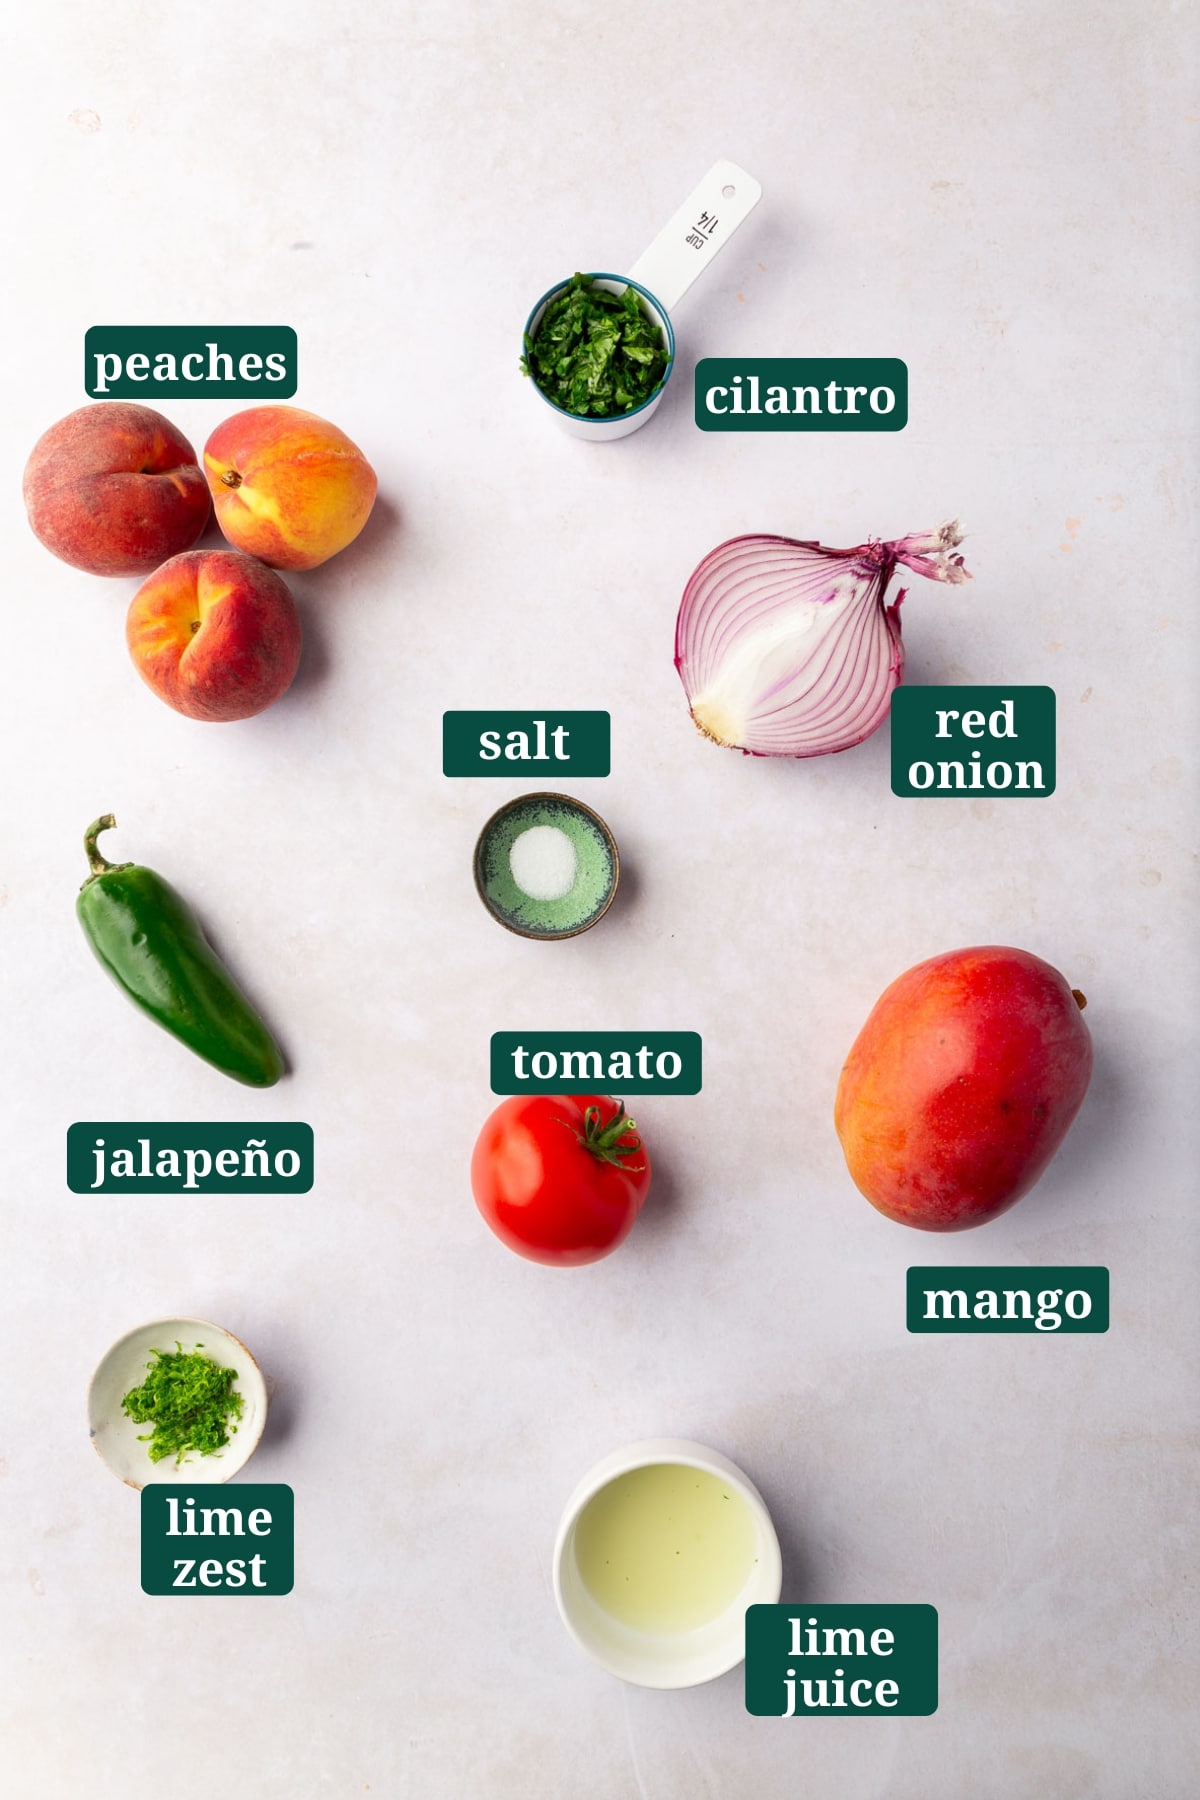 An overhead view of ingredients to make peach mango salsa in small bowls, including peaches, cilantro, salt, red onion, jalapeño, tomato, mango, lime zest, and lime juice with text overlays over each ingredient.